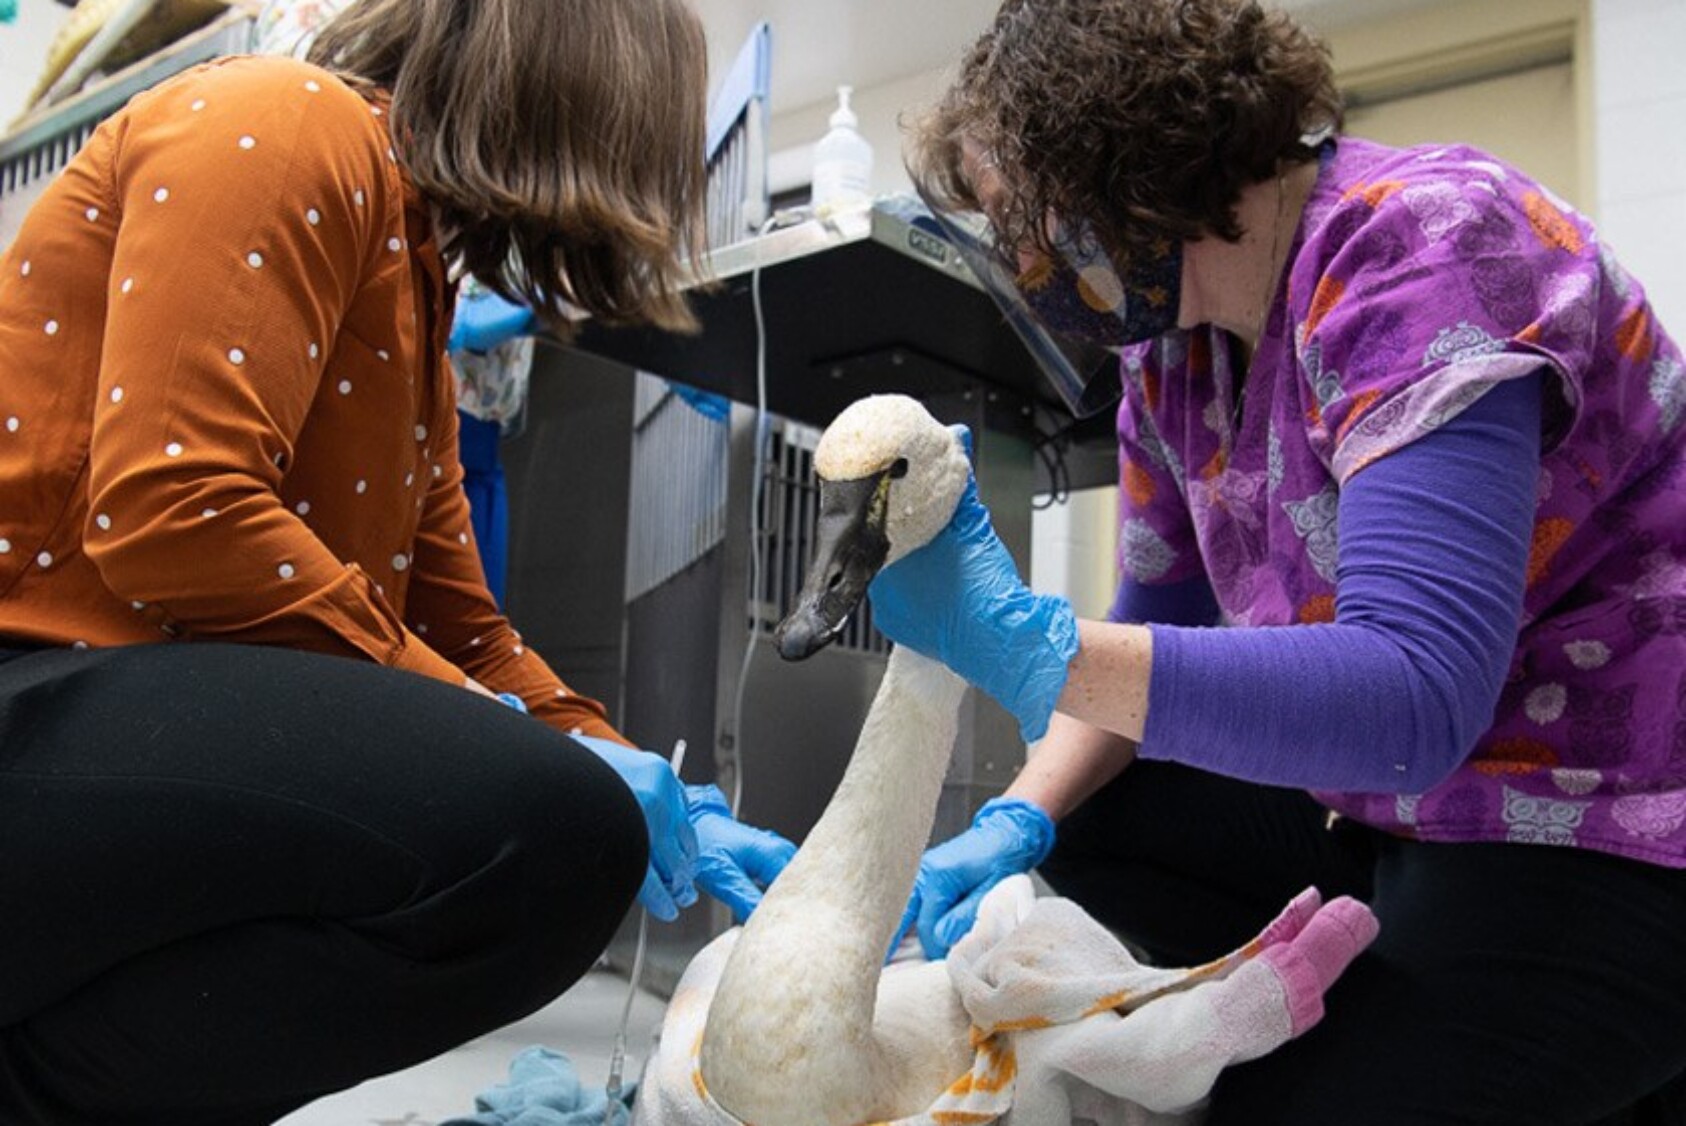 A Tundra Swan being treated for injuries related to fishing line entanglement by Dr. Cindy Hopf (left) and veterinary technician Tina Hlywa (right).